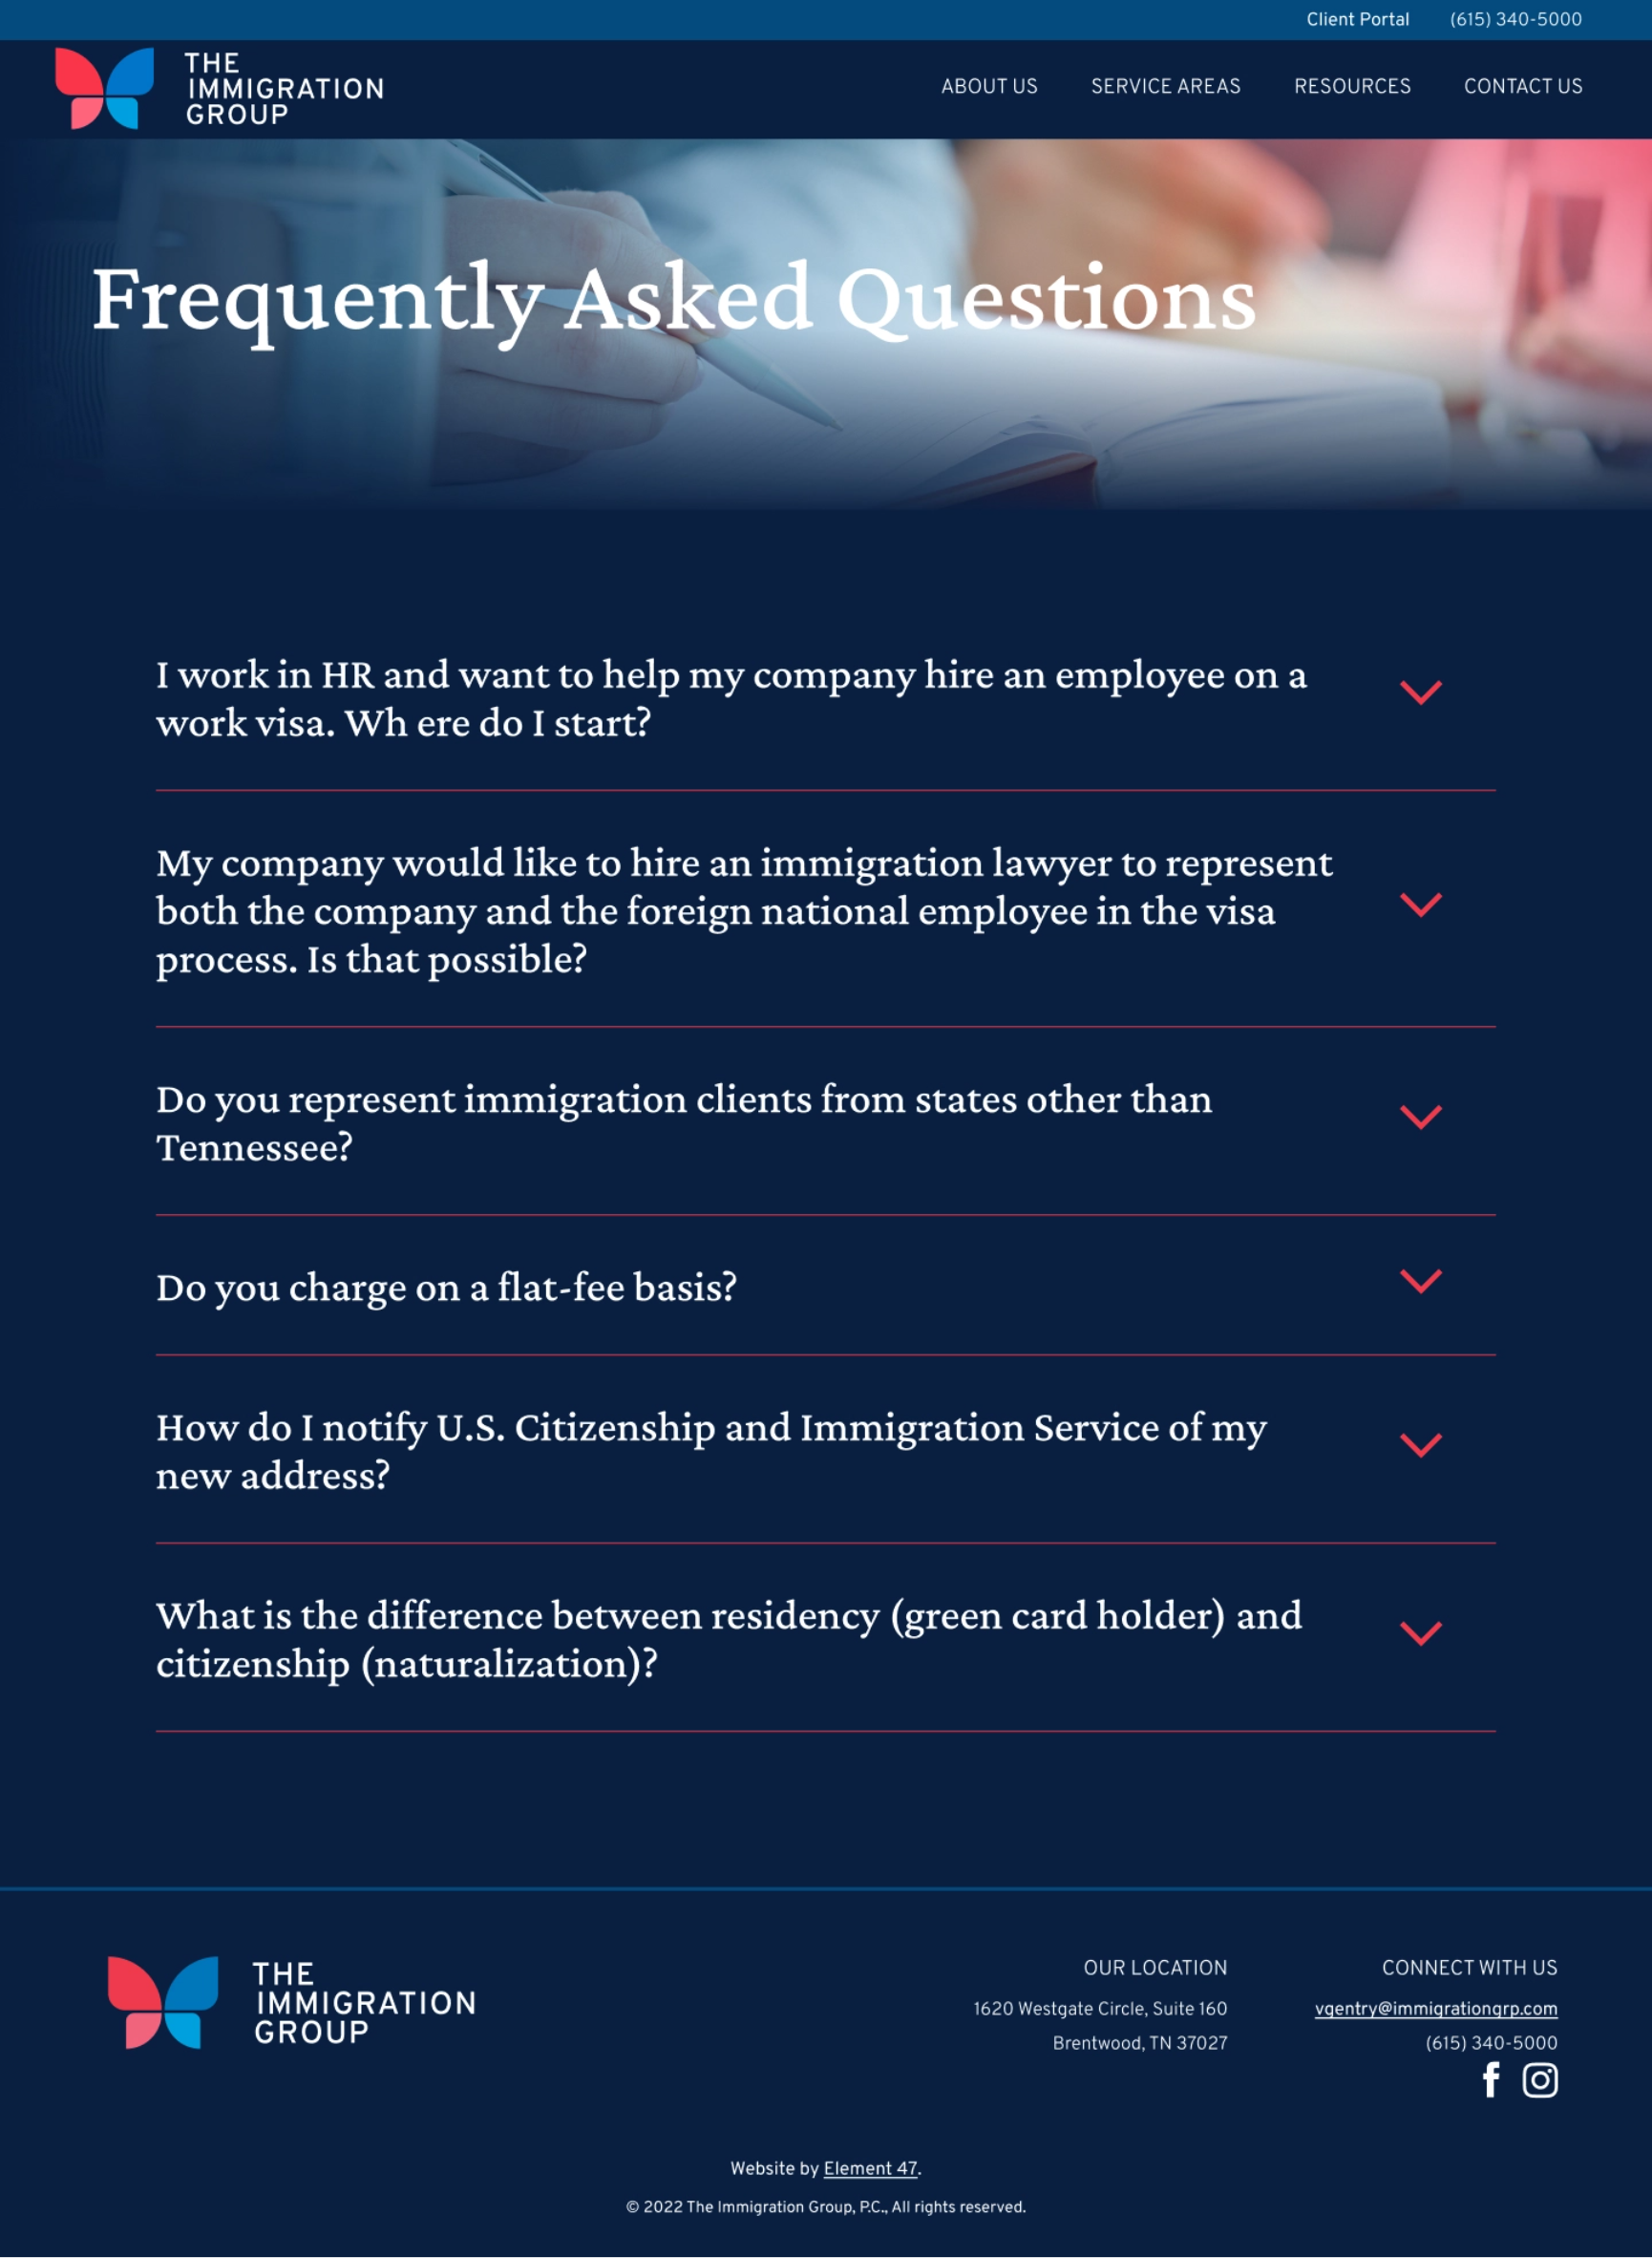 The Immigration Group FAQs page design